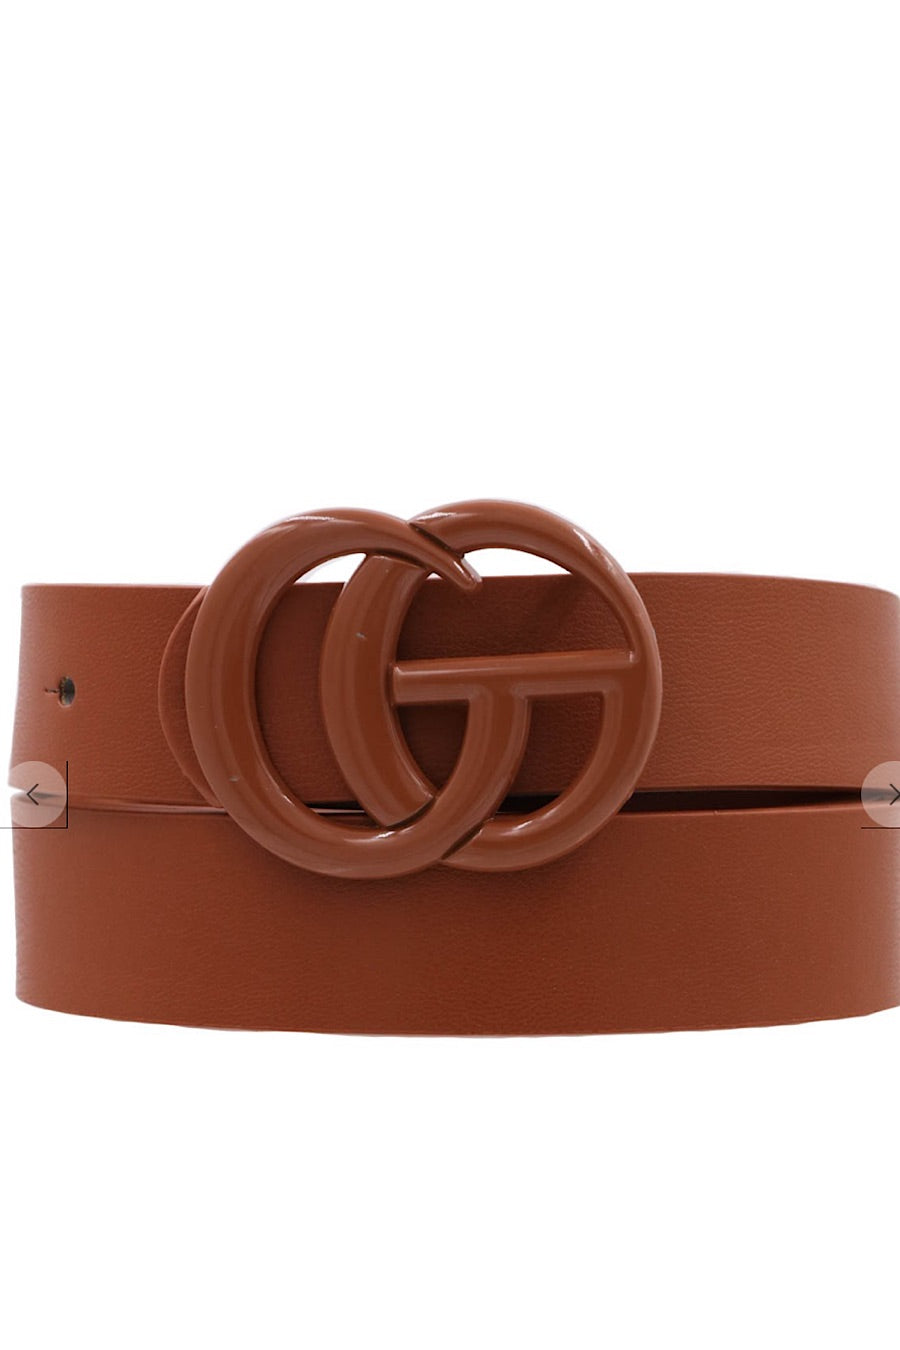 Painted Buckle Belt in Several Colors